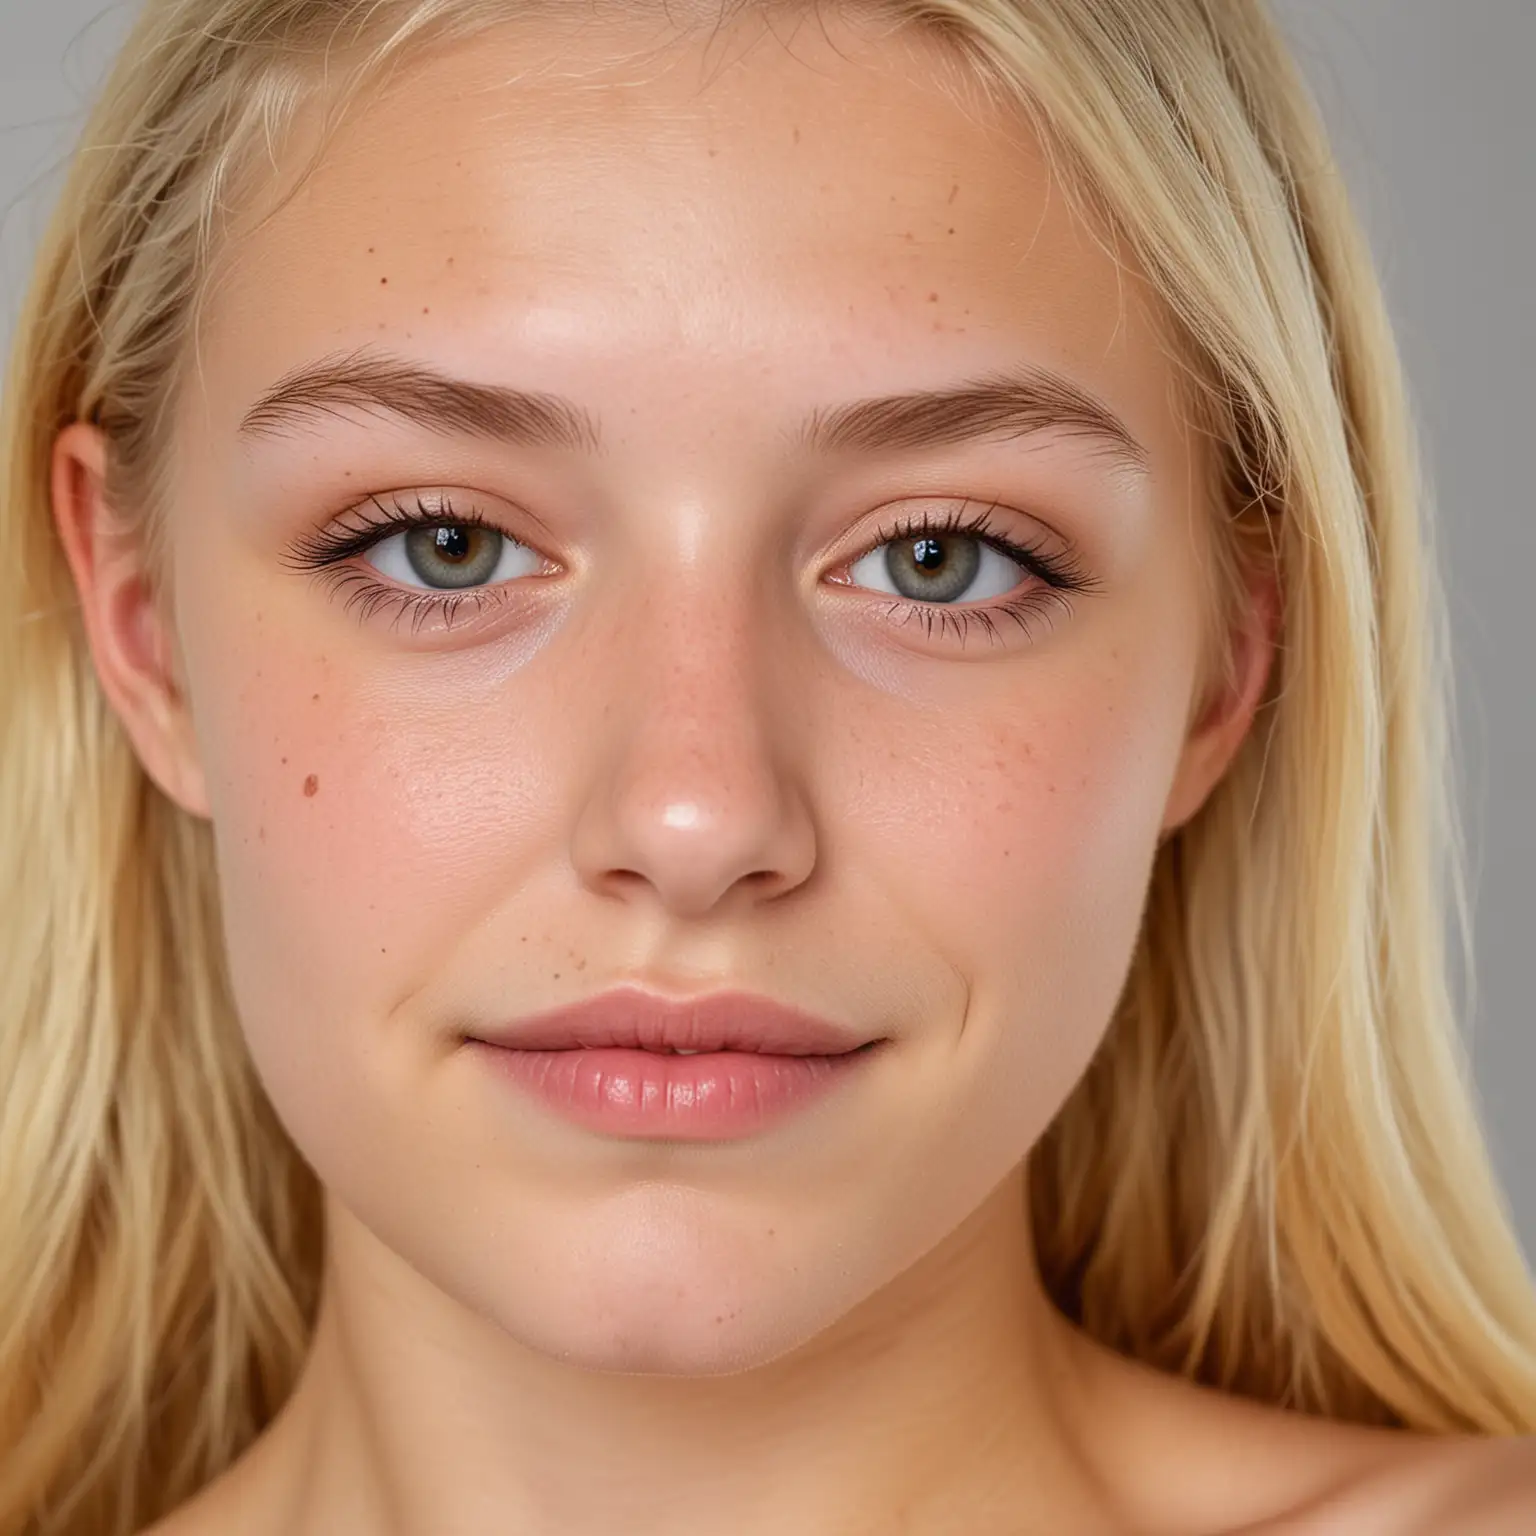 CloseUp Portrait of a Radiant 18YearOld Blonde Woman